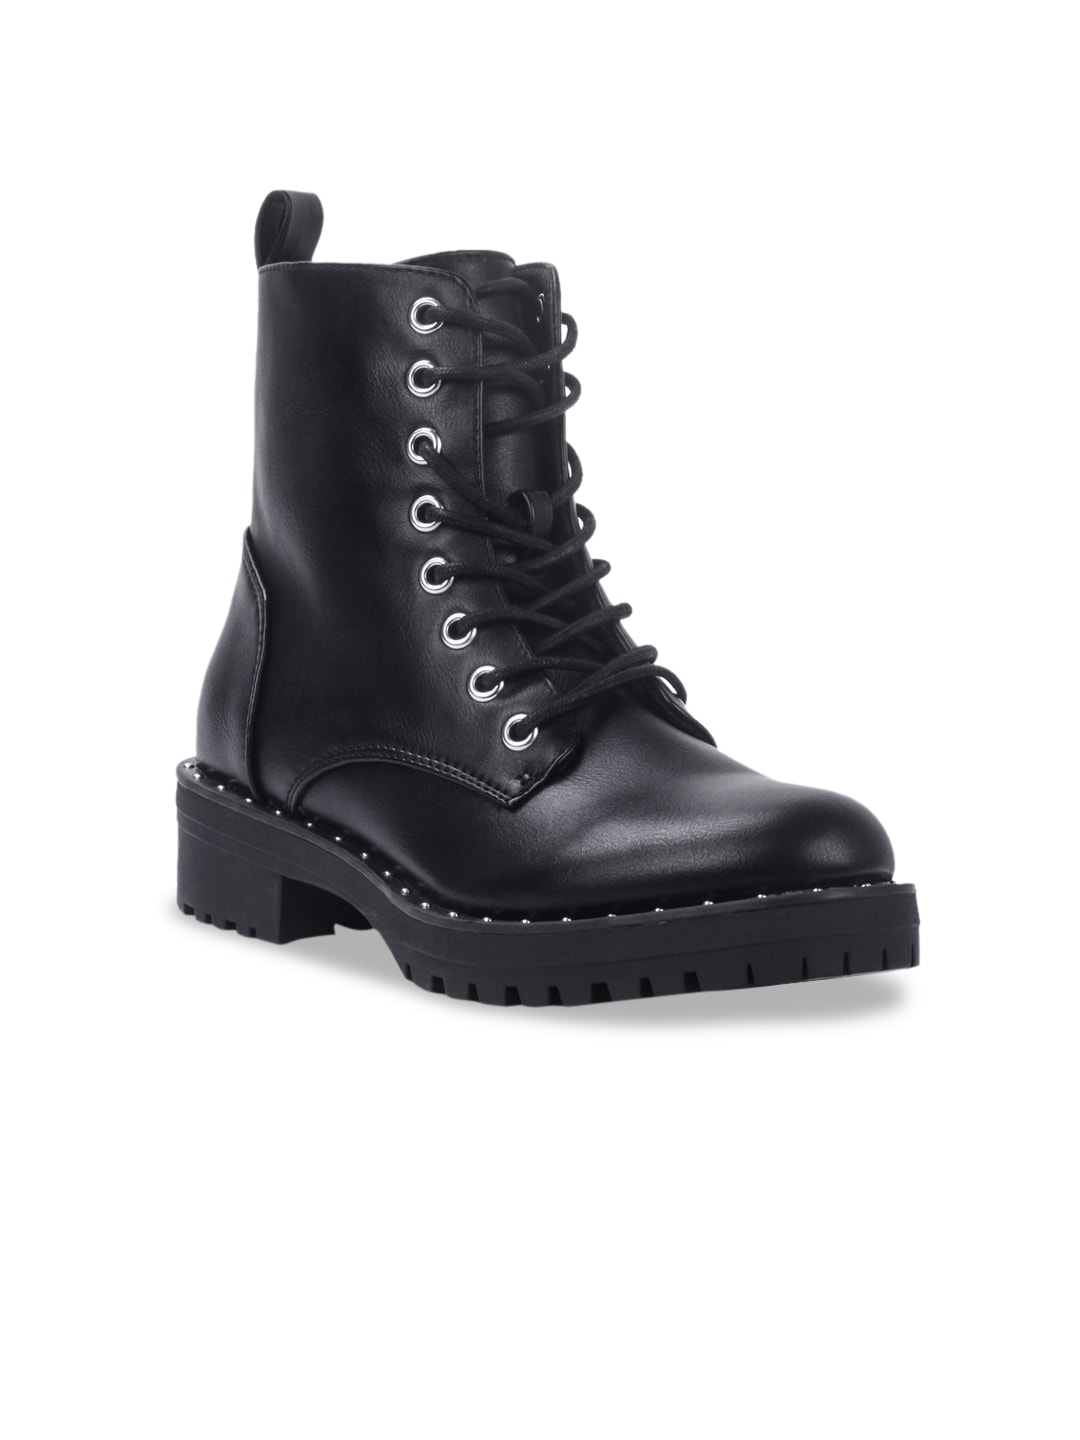 London Rag Women Black Solid High-Top Stud Lined Biker Block Heeled Boots with Cleats Price in India